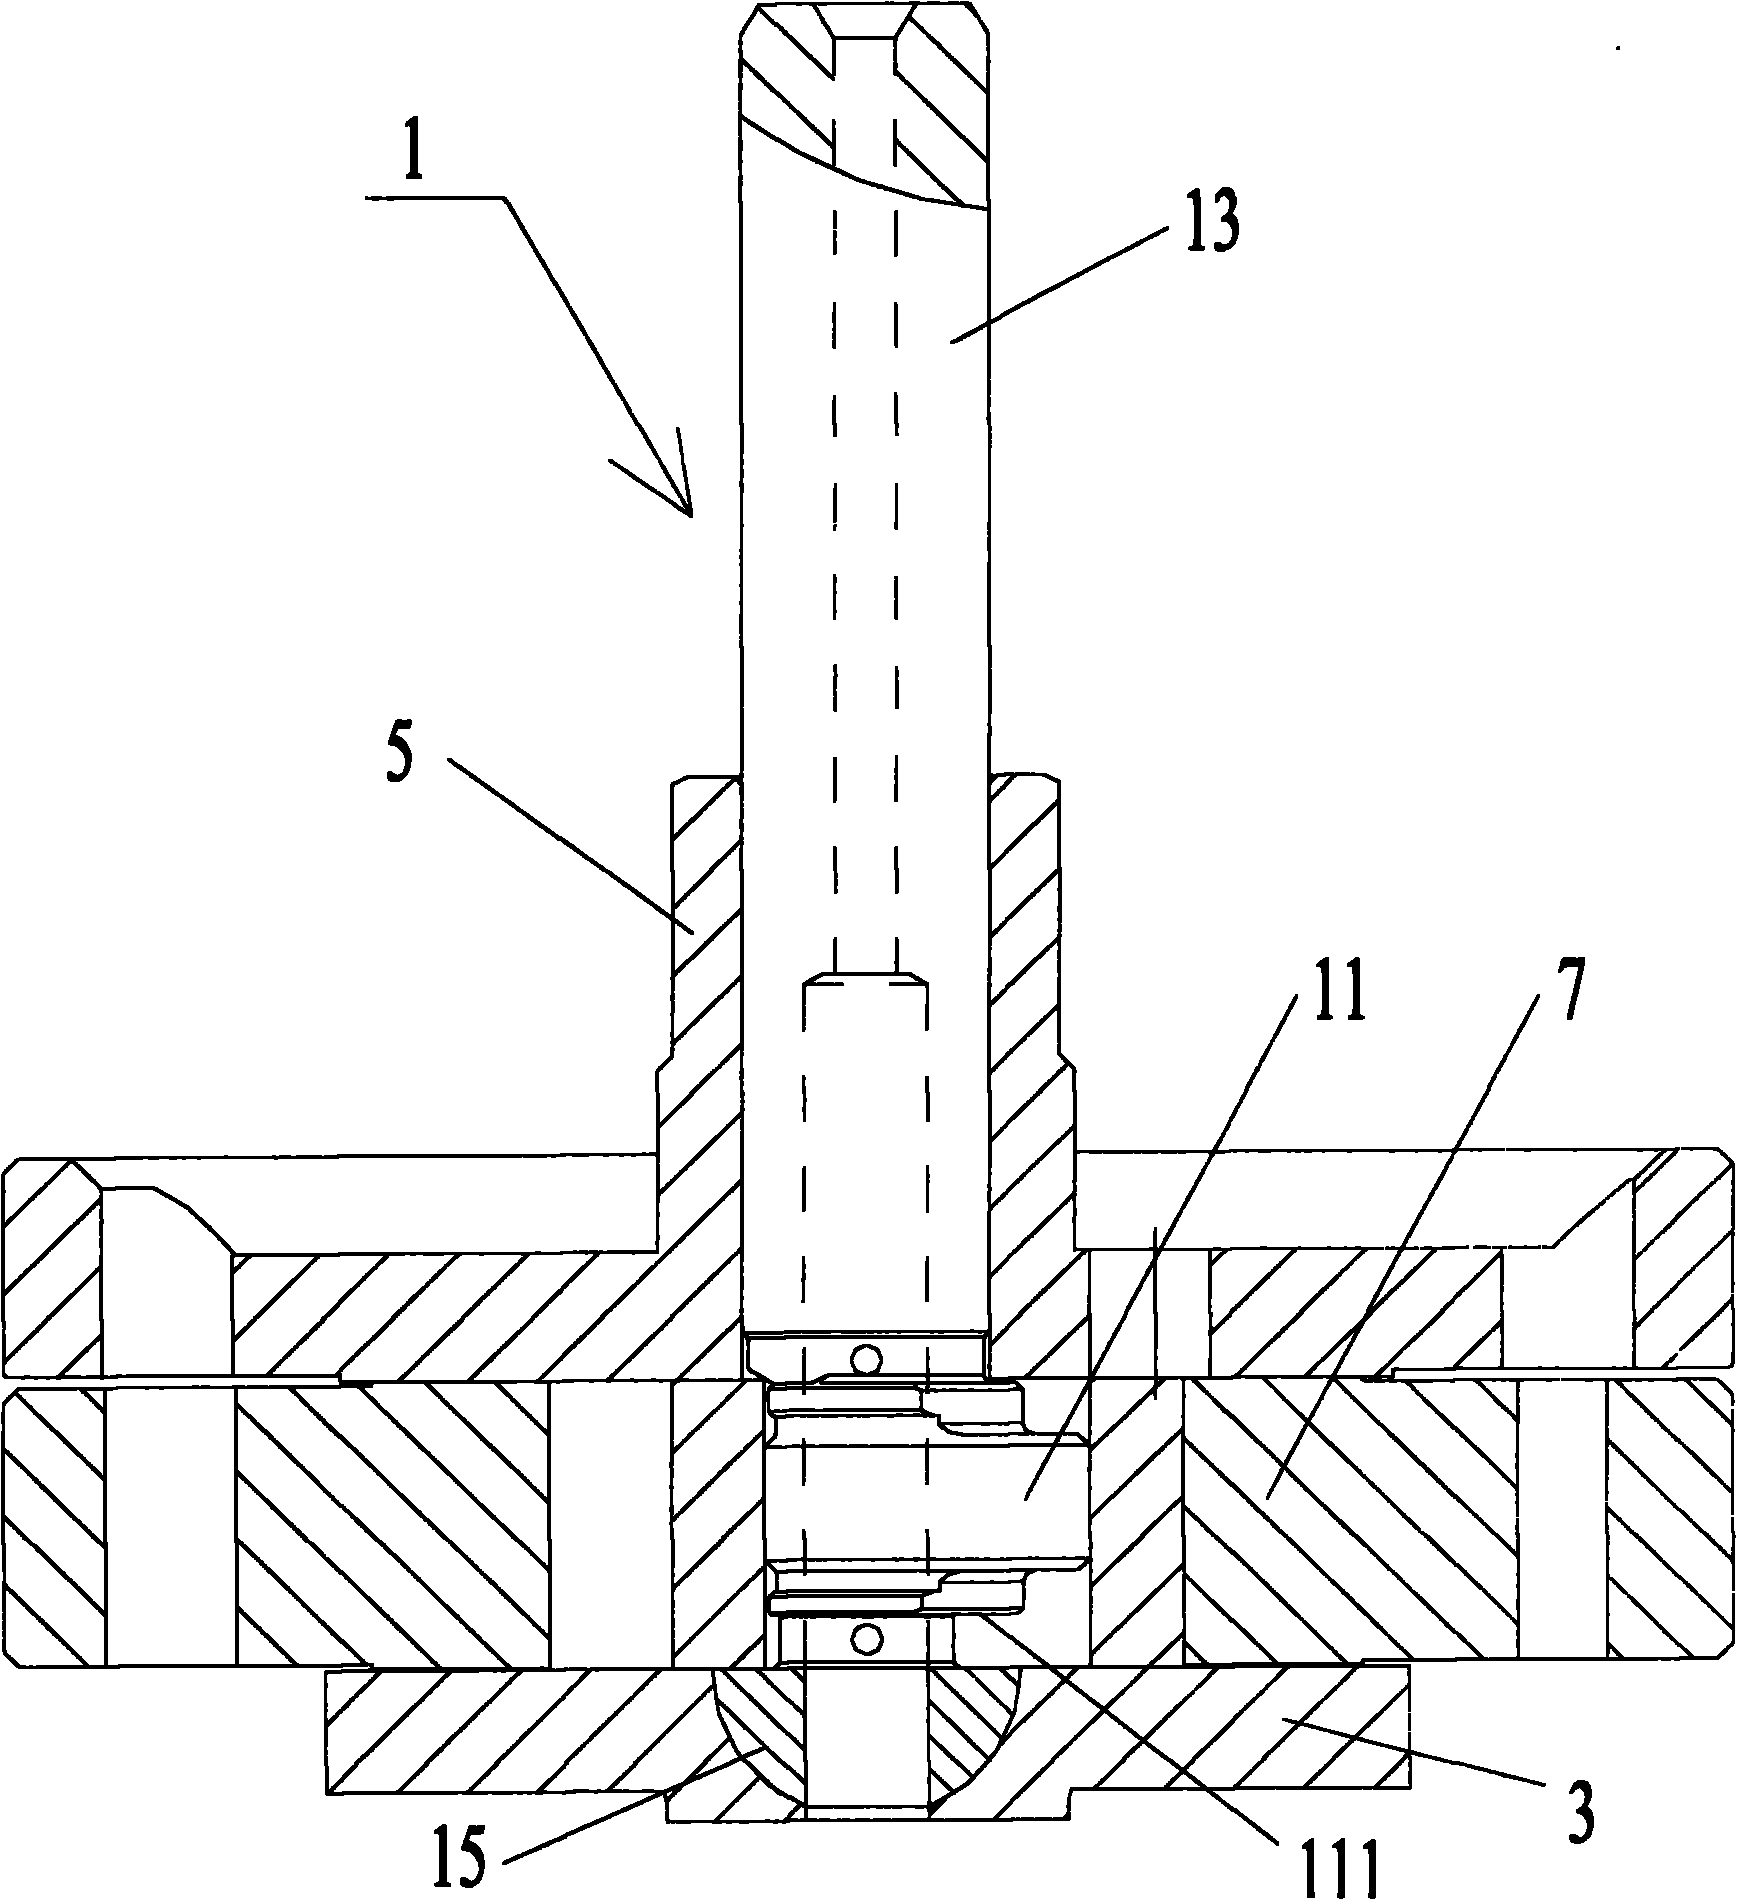 Pump body structure of compressor and compressor with same